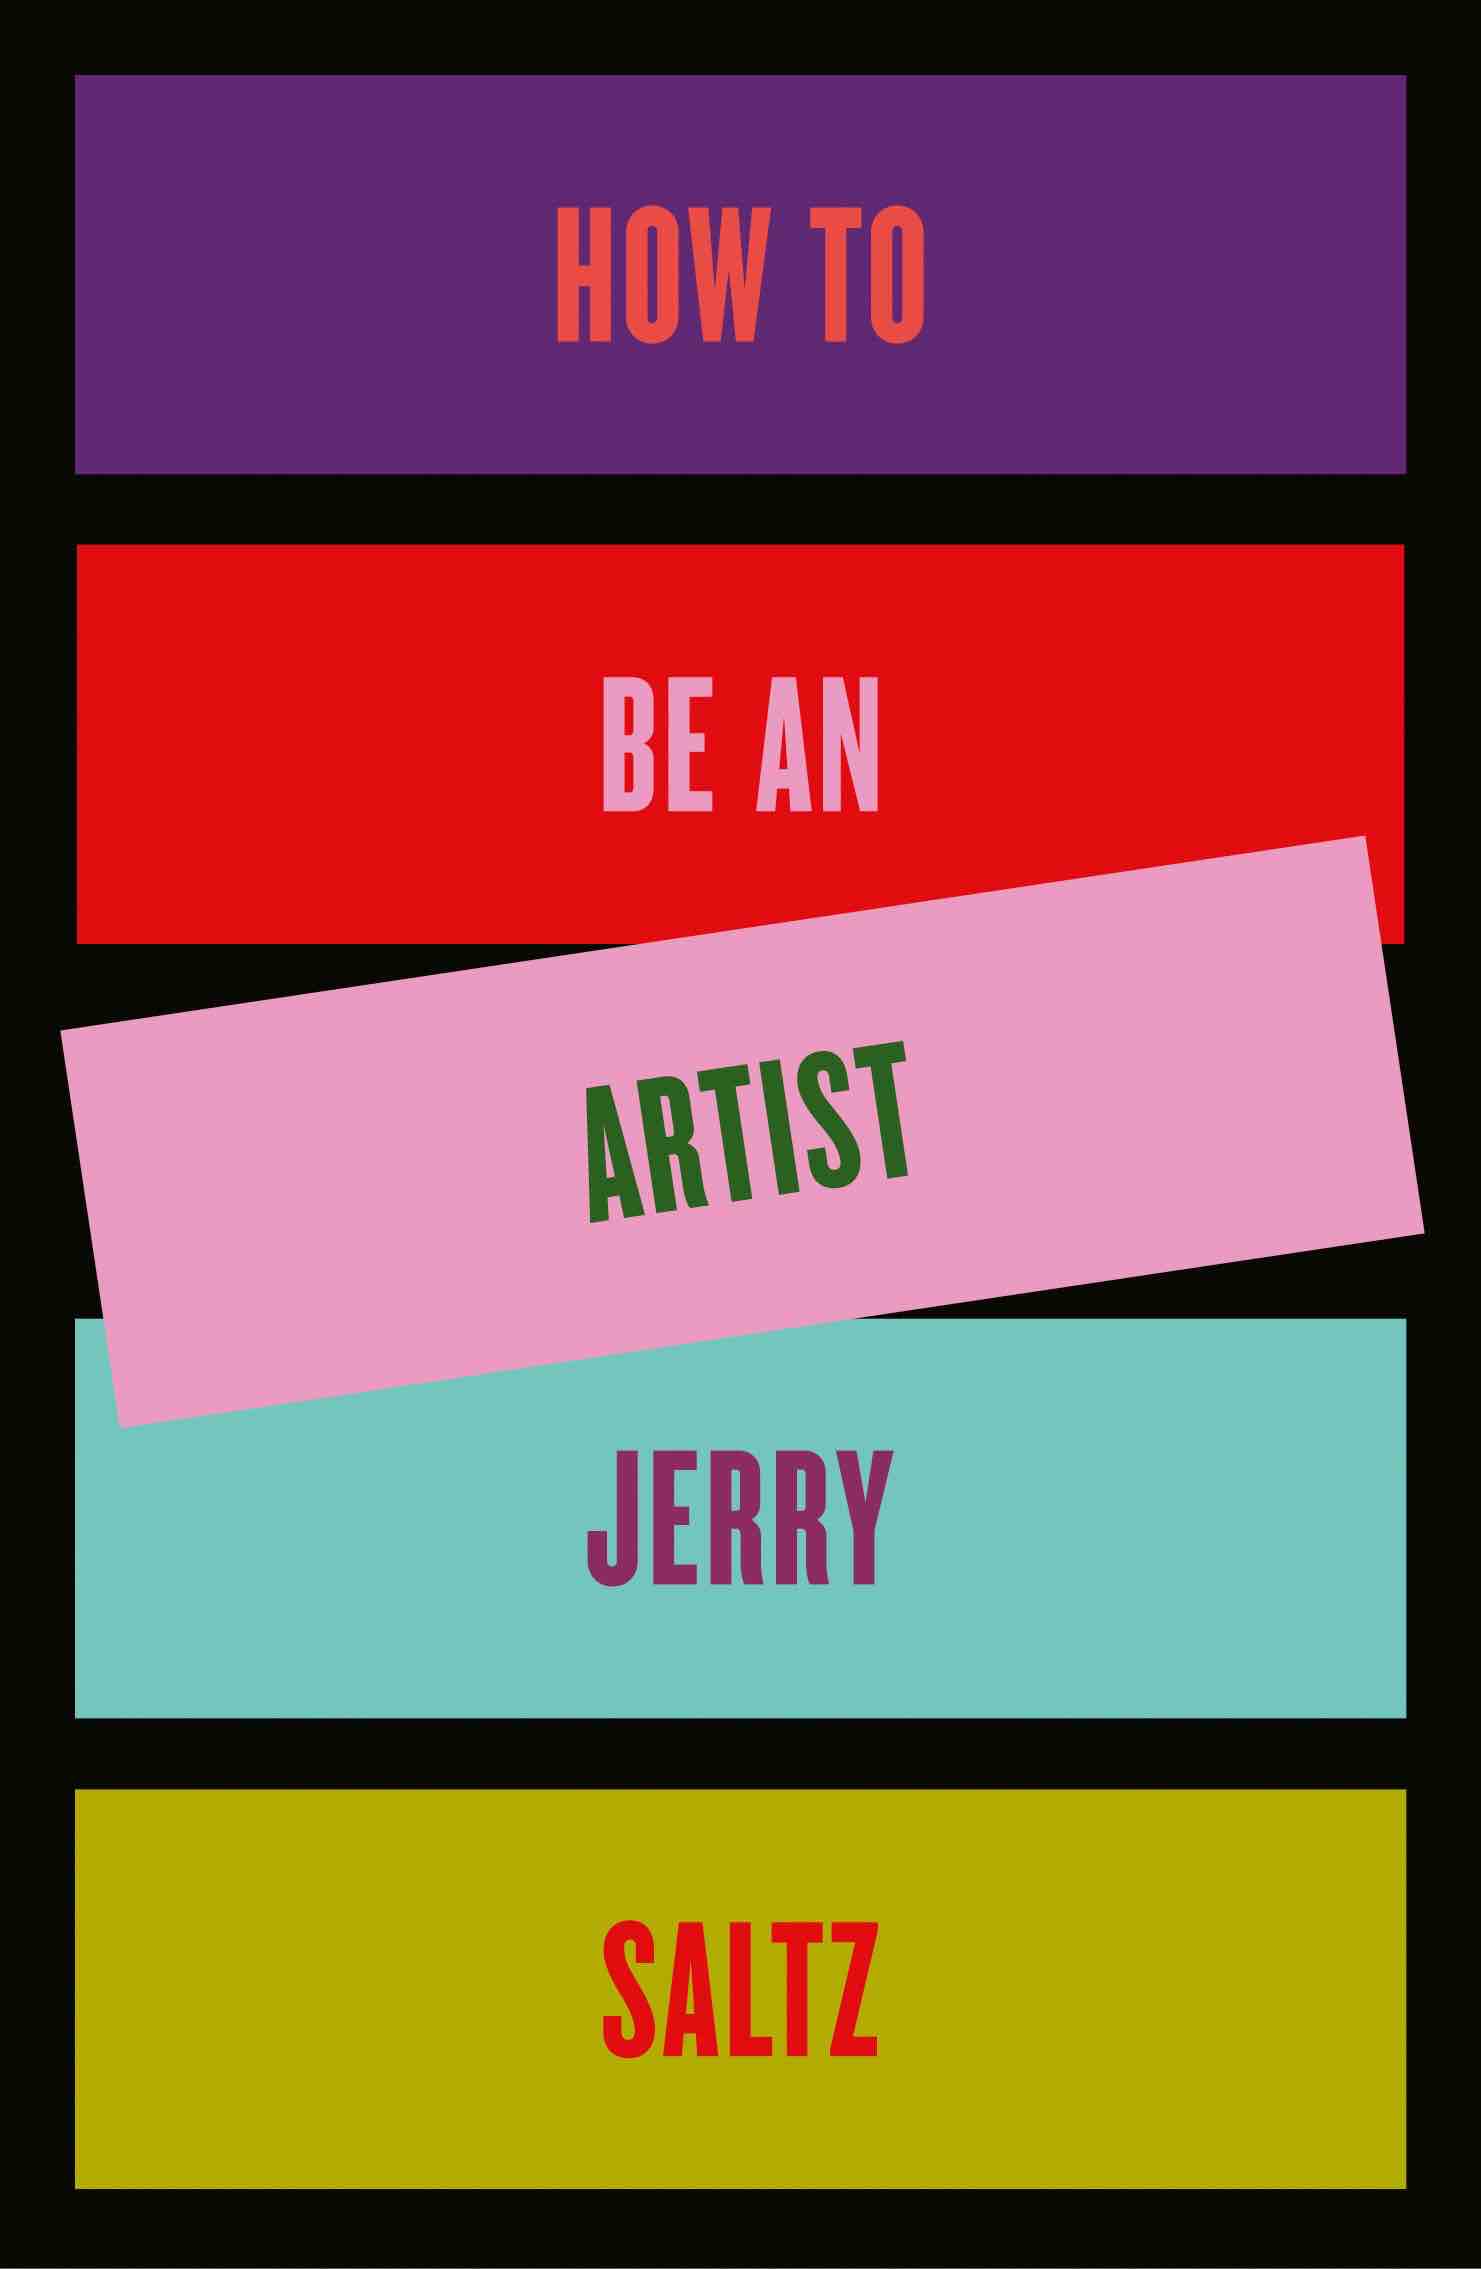 How to Be an Artist by Jerry Saltz copy